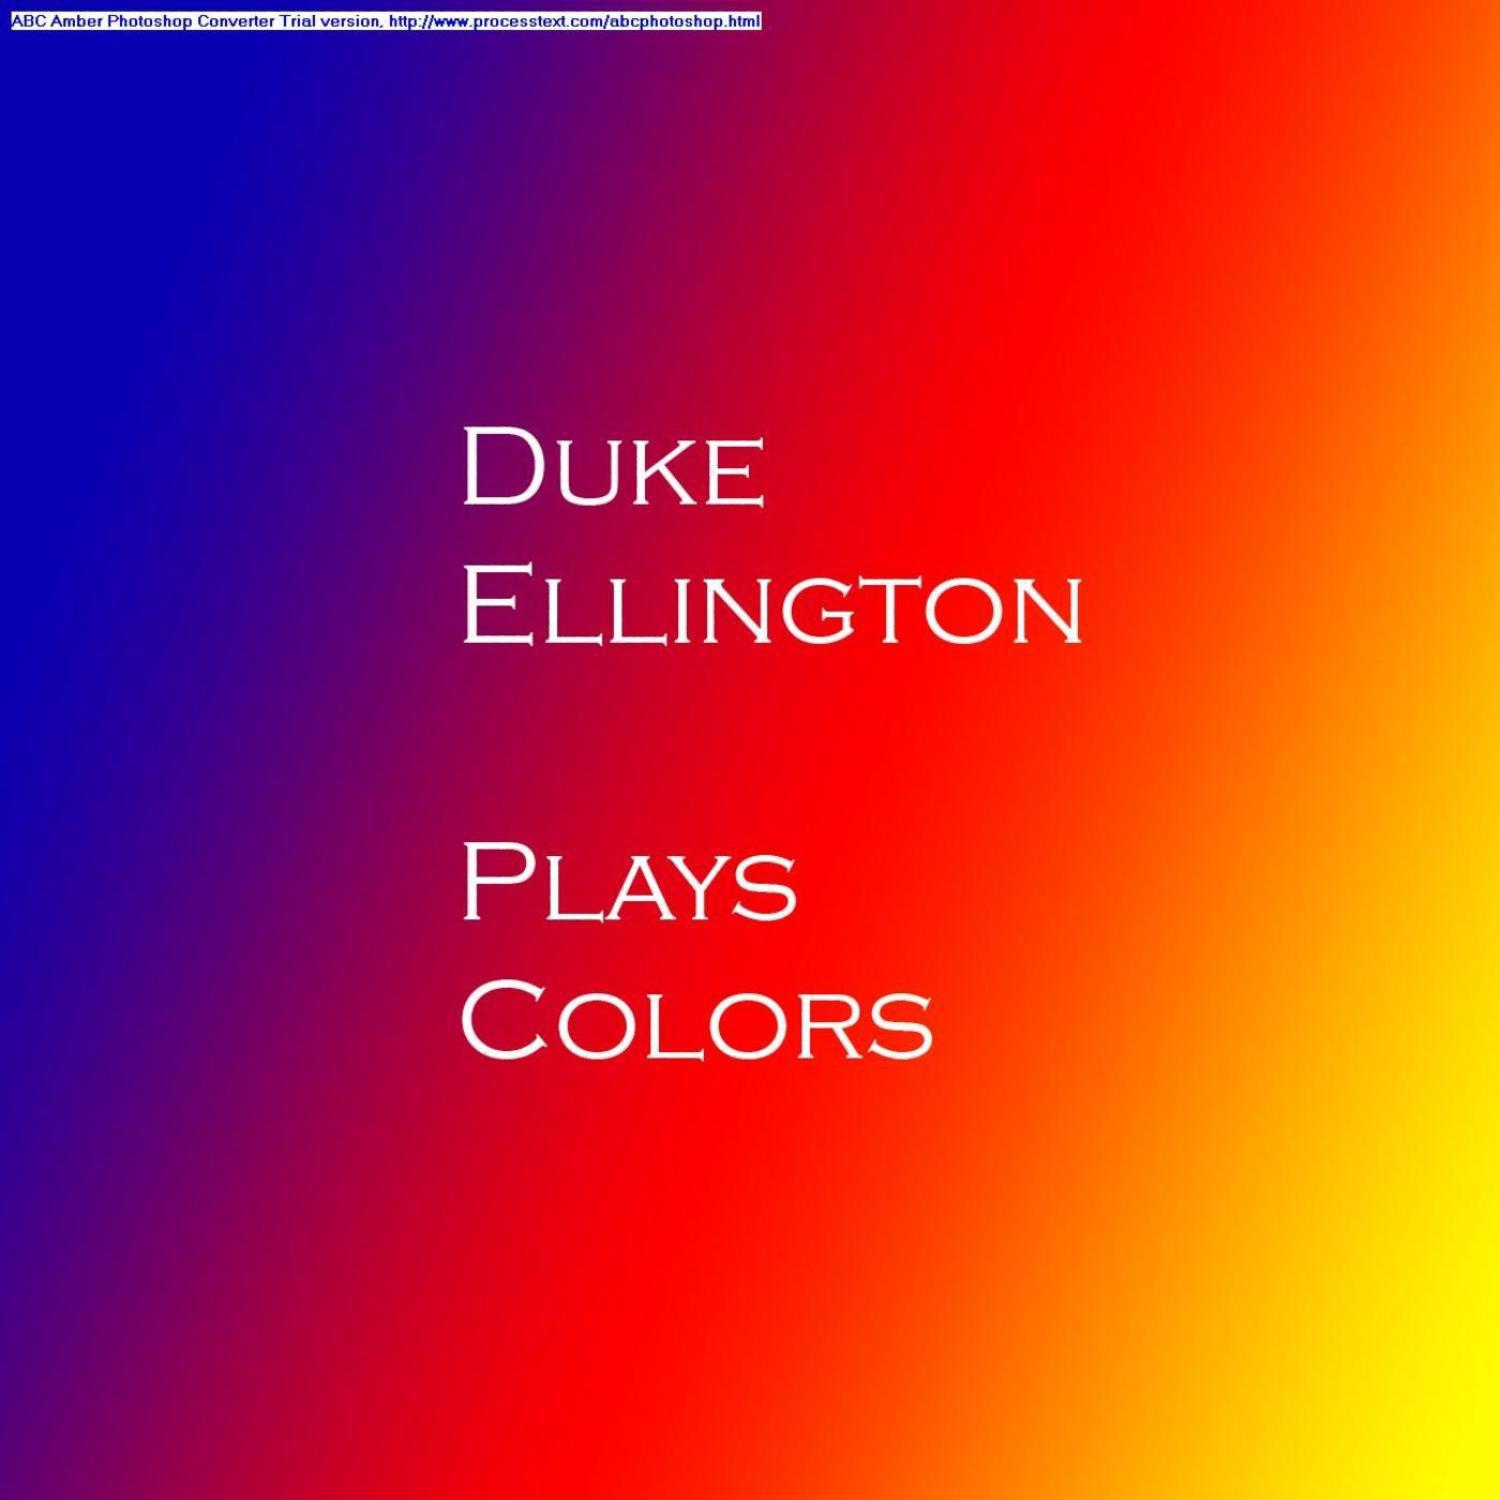 Plays Colors